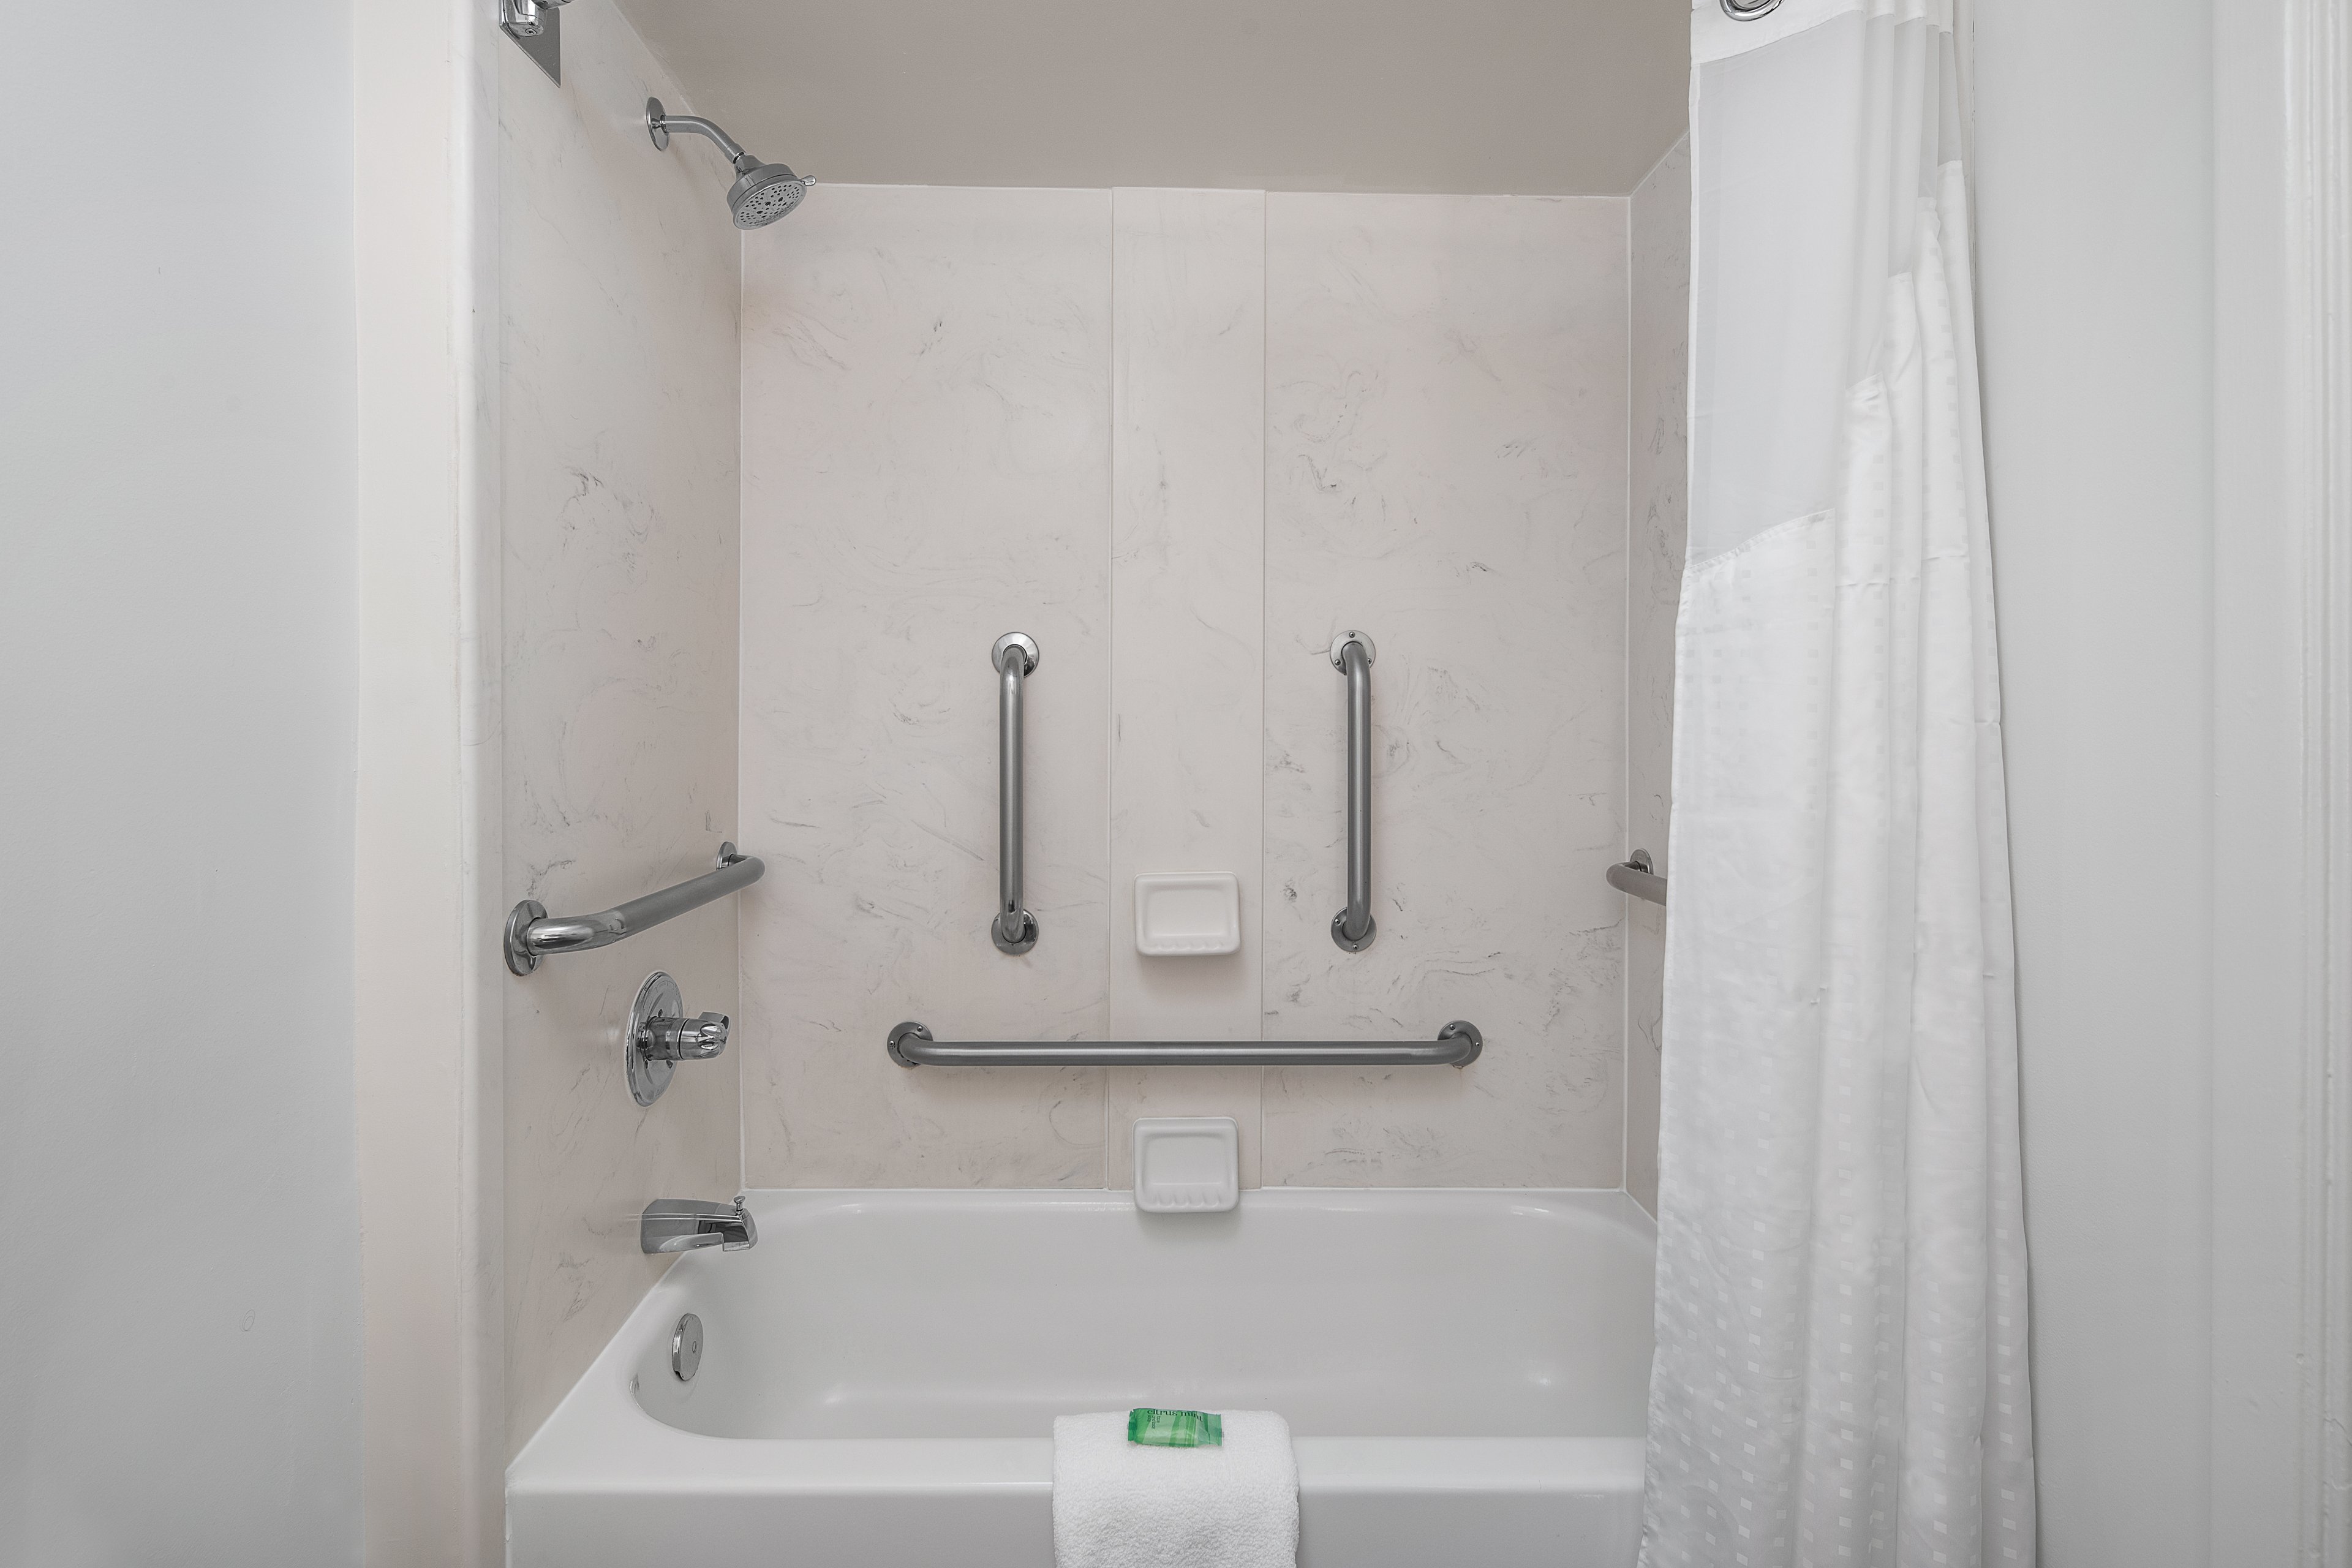 Mobility tub is available for ADA/Handicap accessible Bathroom.